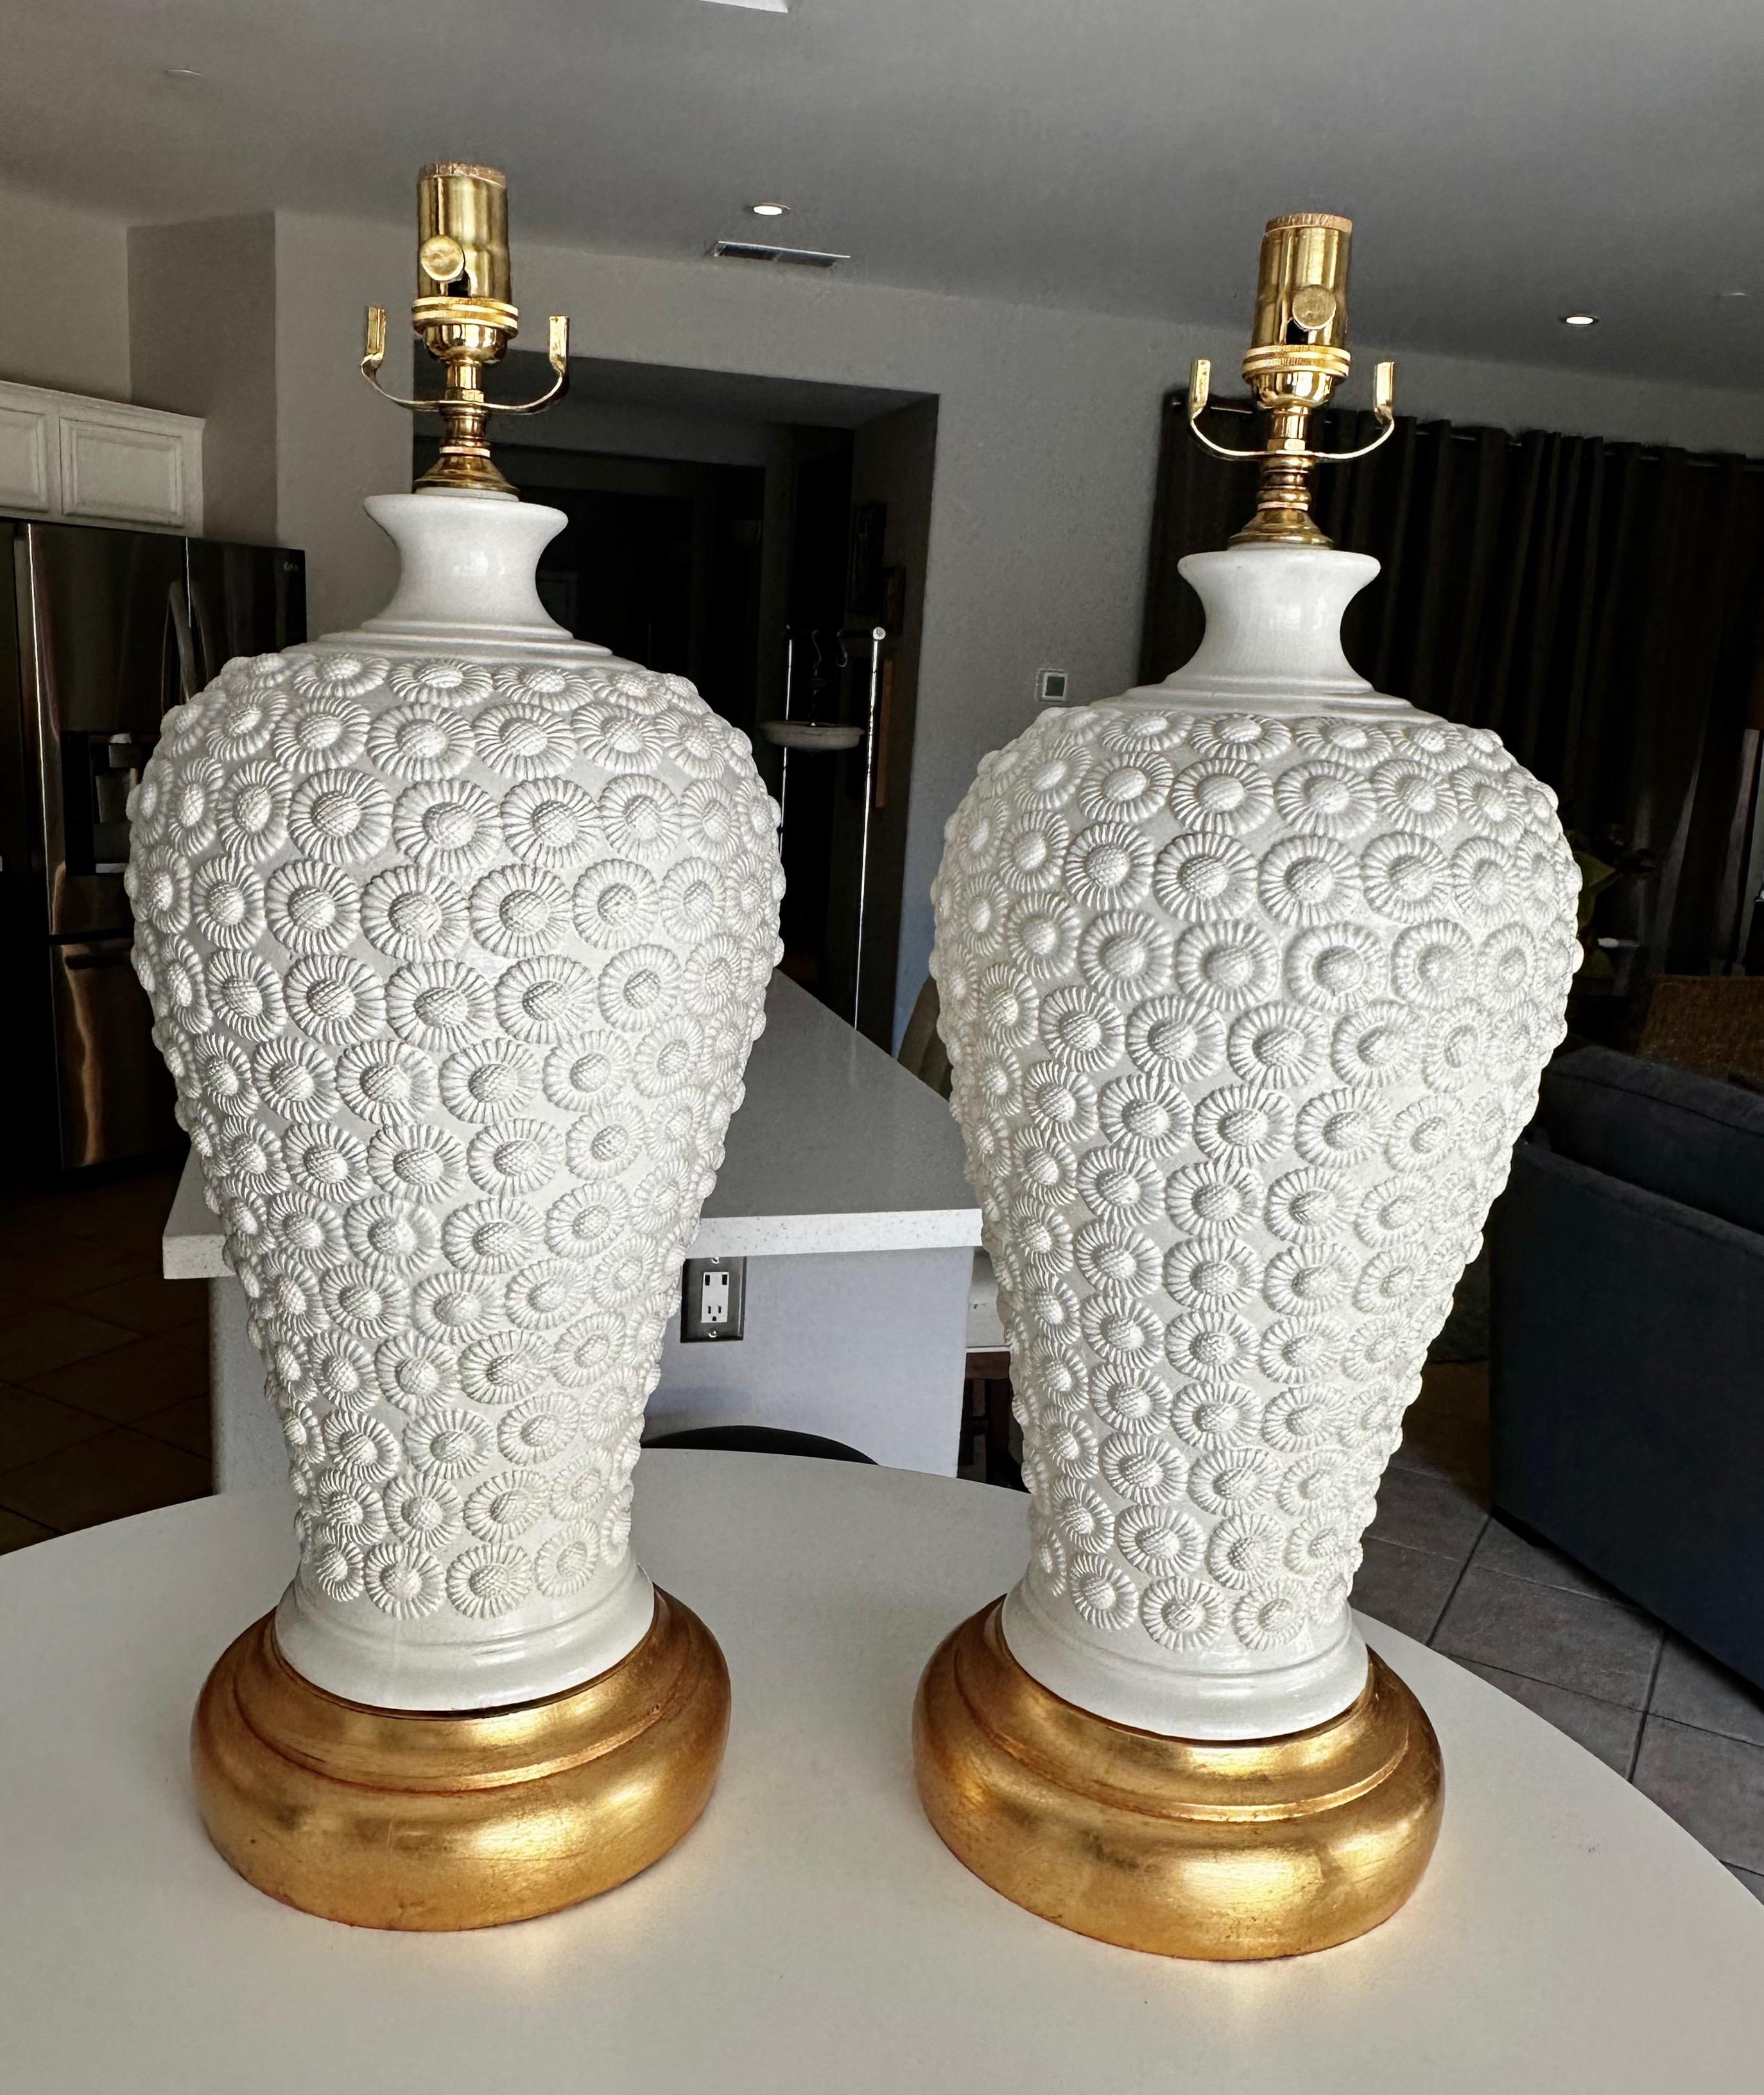 Pair of large white Italian porcelain table lamps with repeated daisy flower pattern throughout. Mounted on turned giltwood bases. Newly wired with new brass 3 way sockets and cords. Overall height top of socket 25